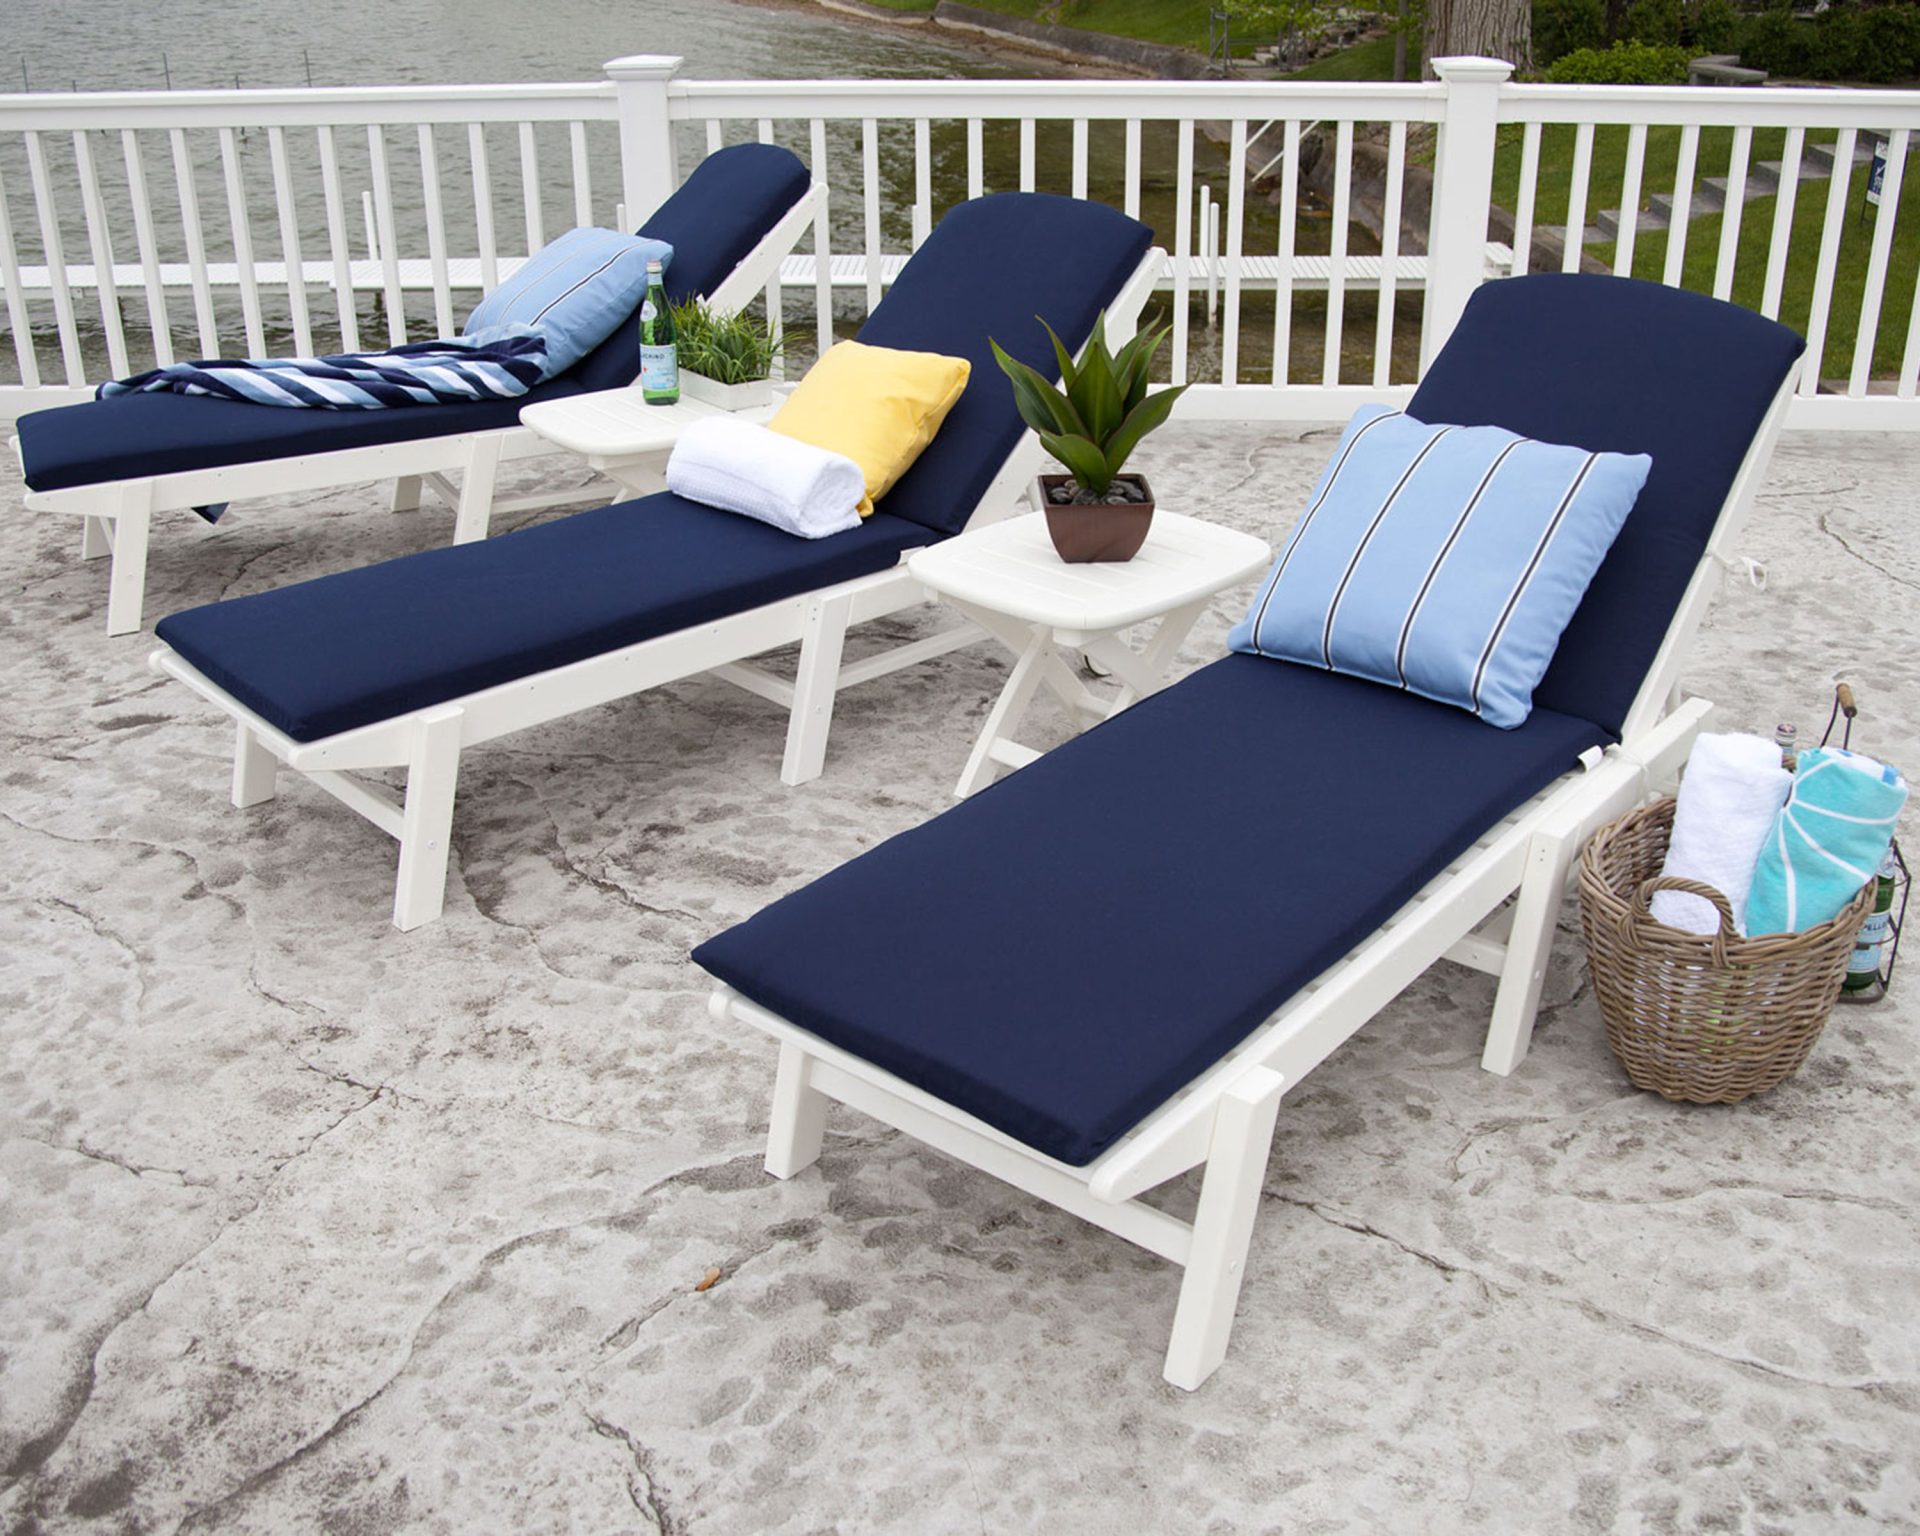 Polywood® – Nautical Chaise with Wheels